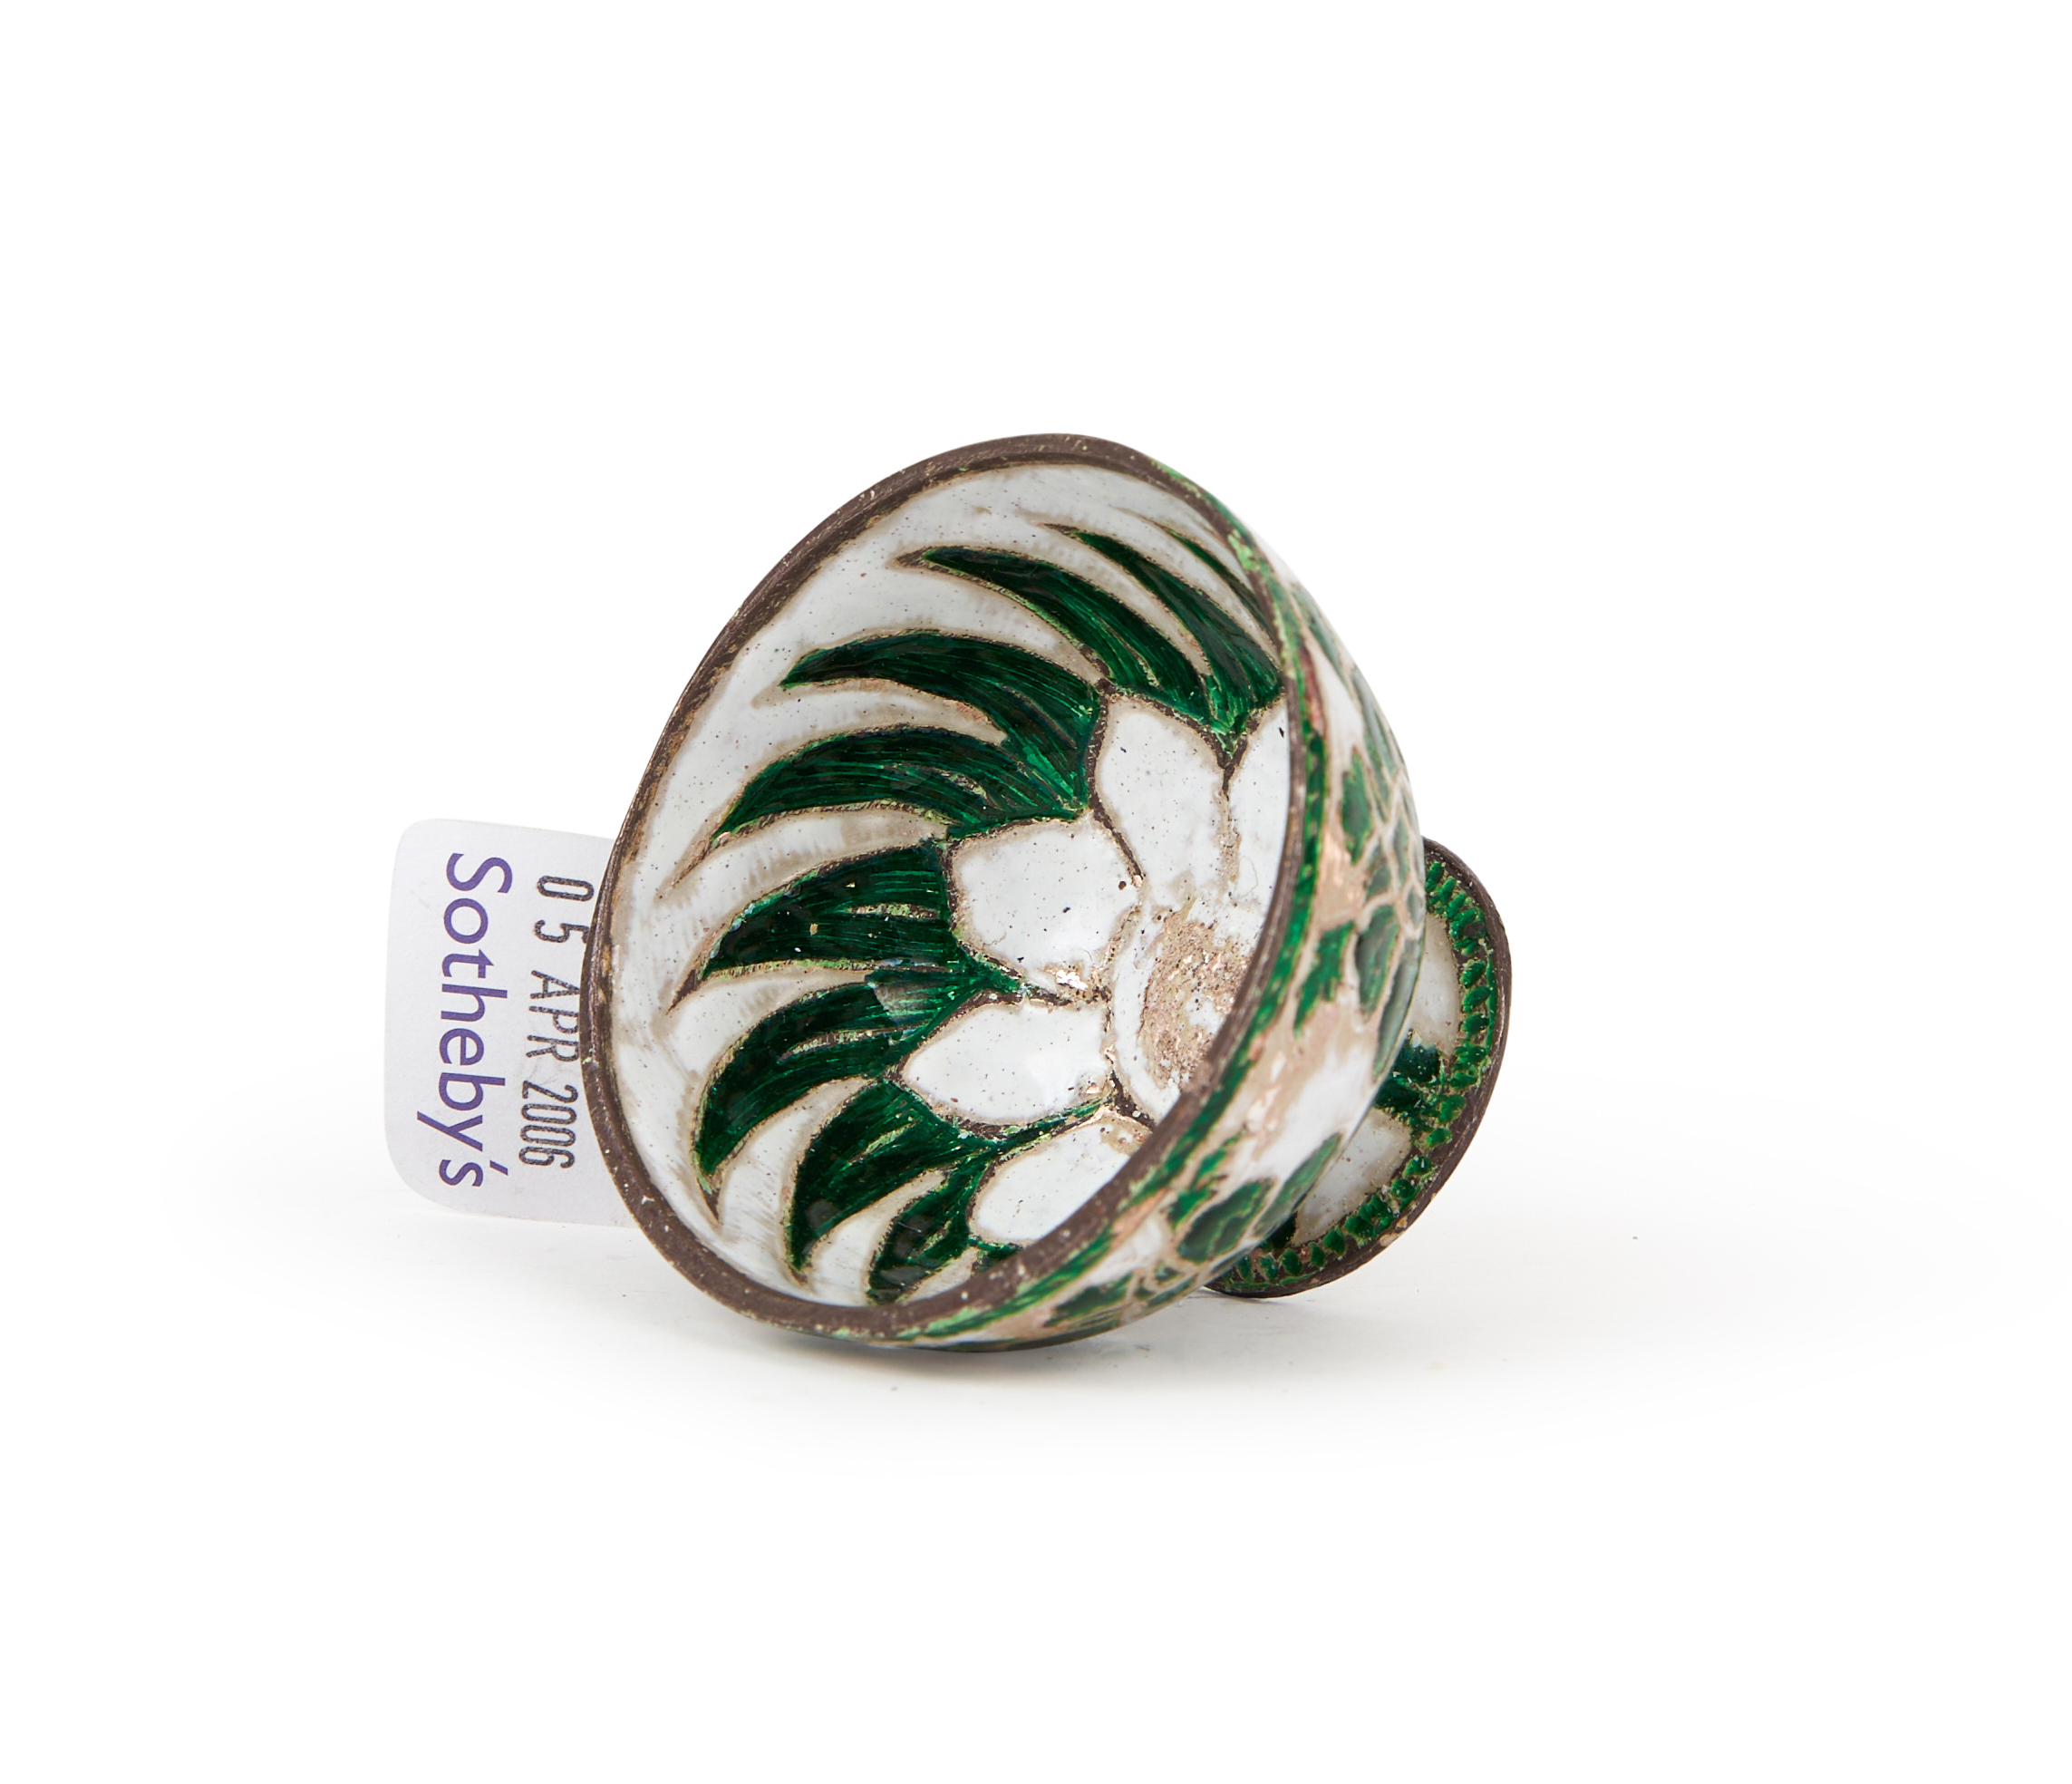 A ROYAL GREEN & WHITE ENAMELLED MUGHAL WINE CUP, 17TH CENTURY, INDIA - Image 3 of 5